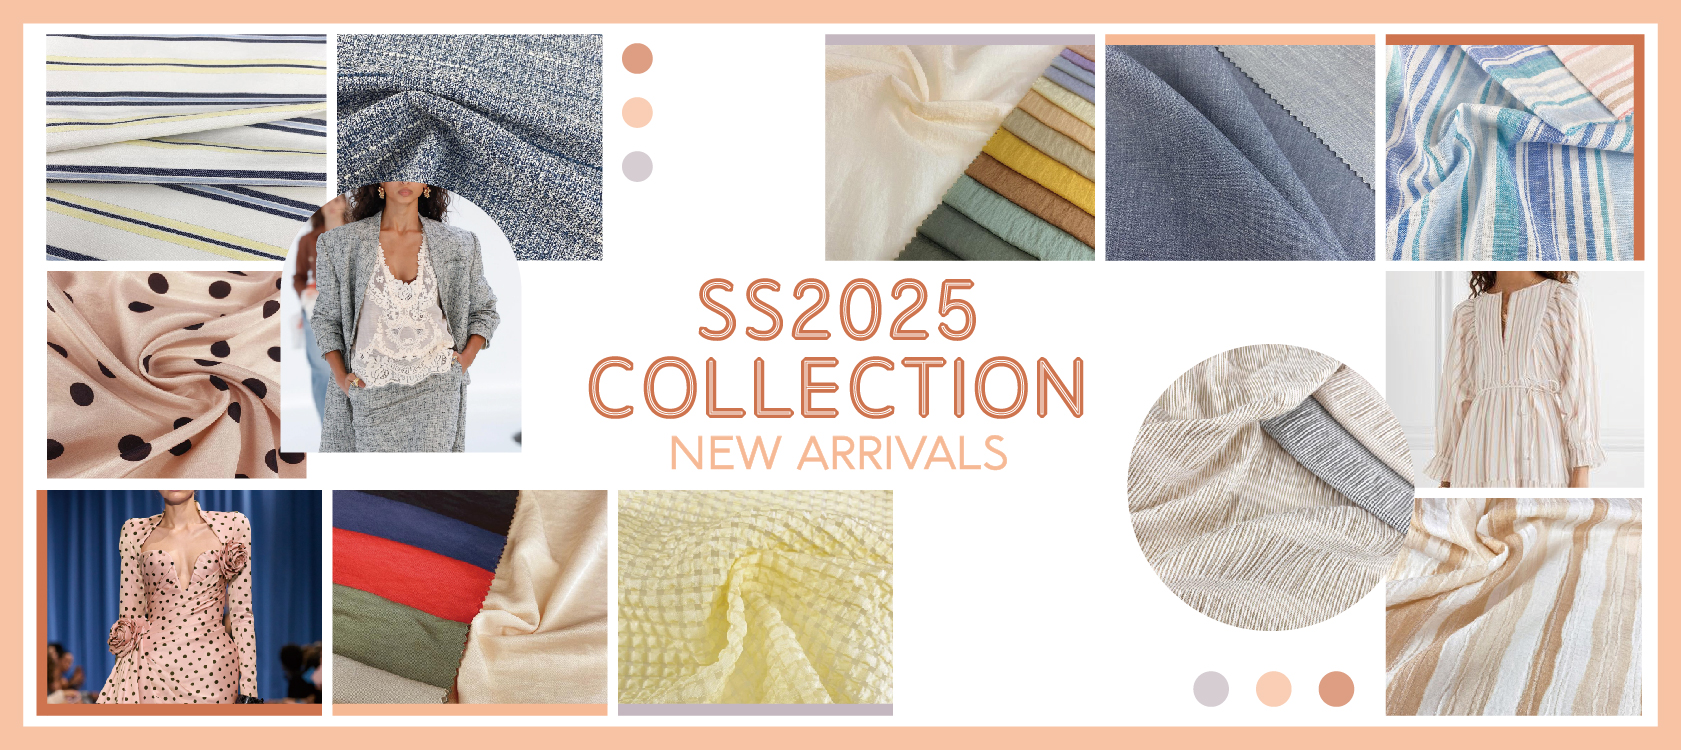 SS 2025 Collection